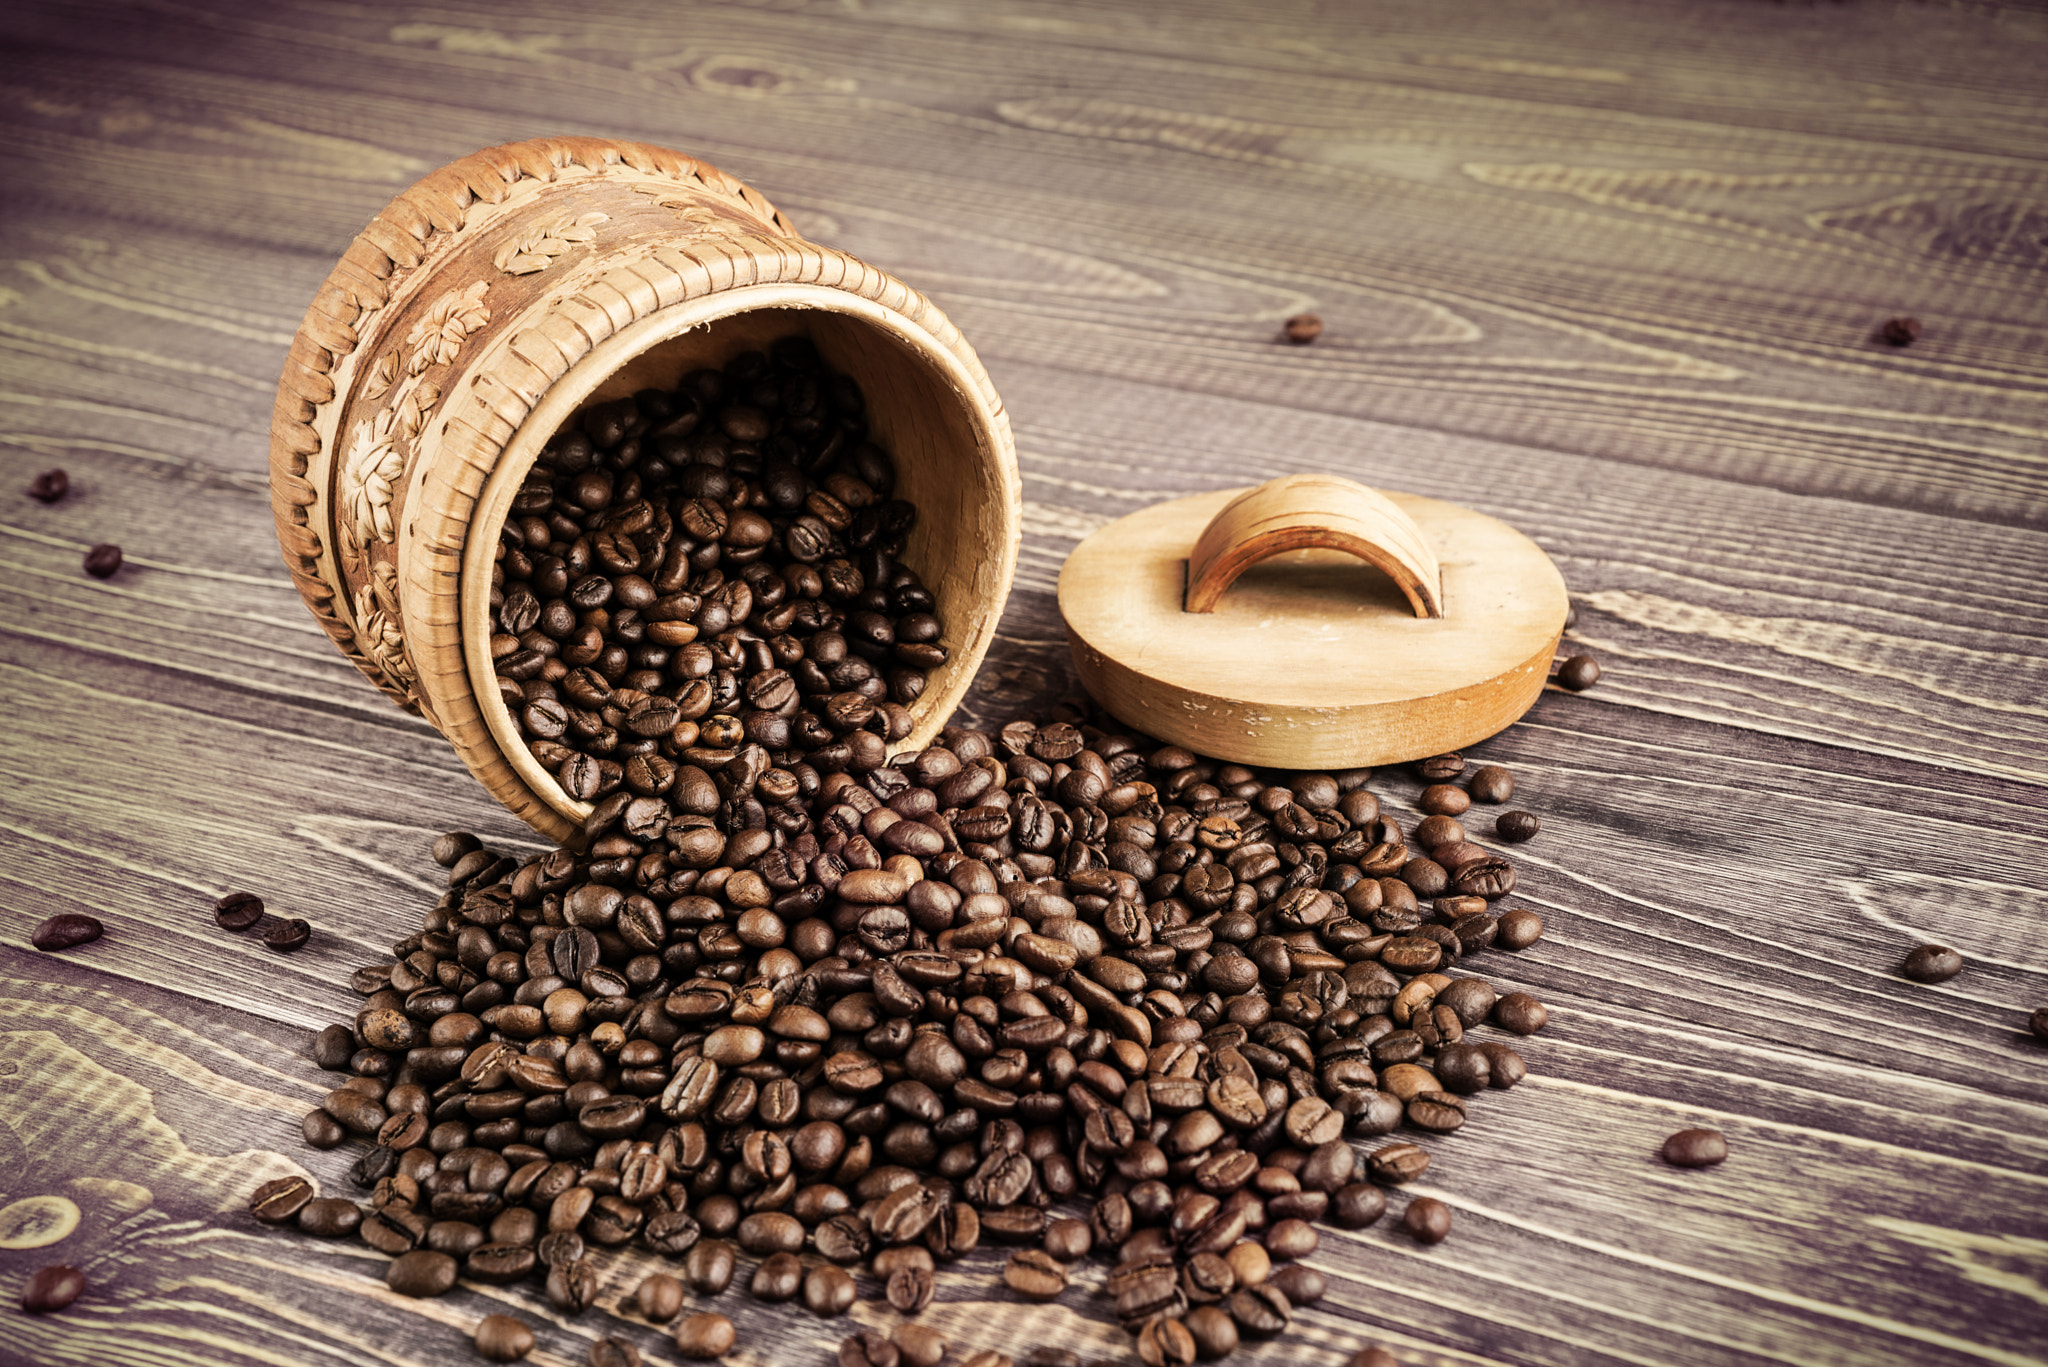 Nikon D750 sample photo. Roasted coffee beans in wooden basket on a wooden photography